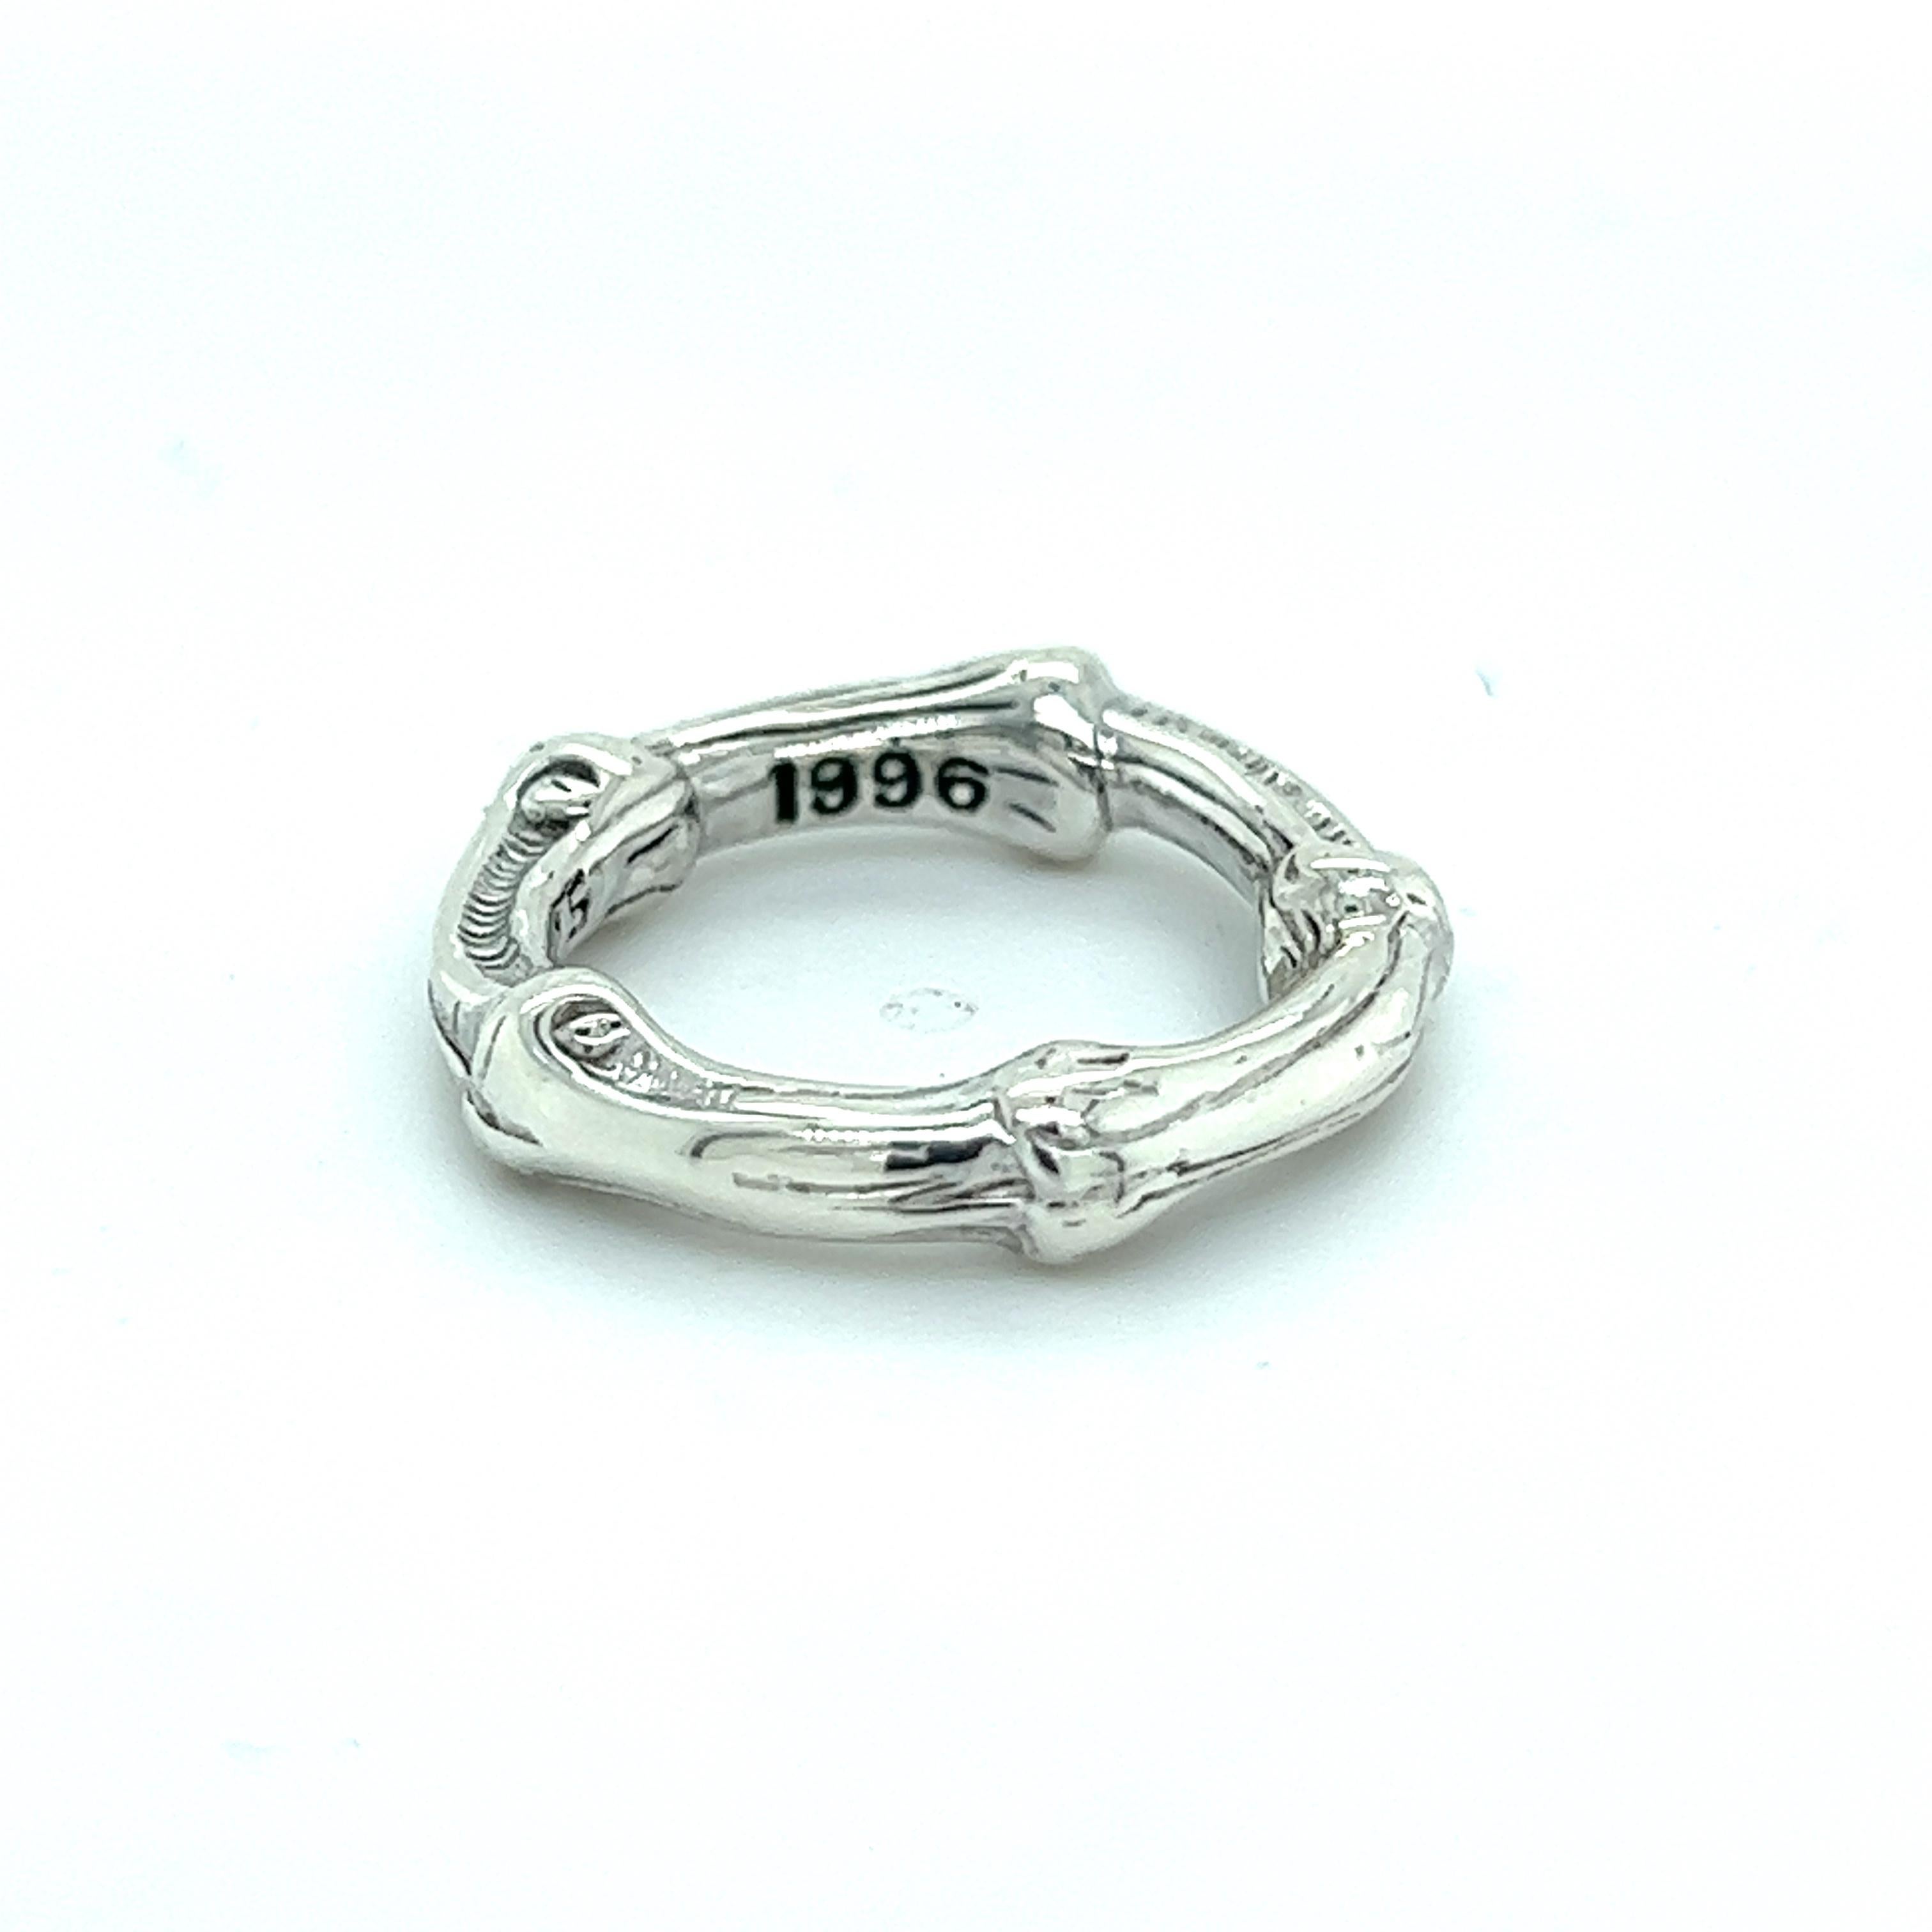 4.5 ring size in mm